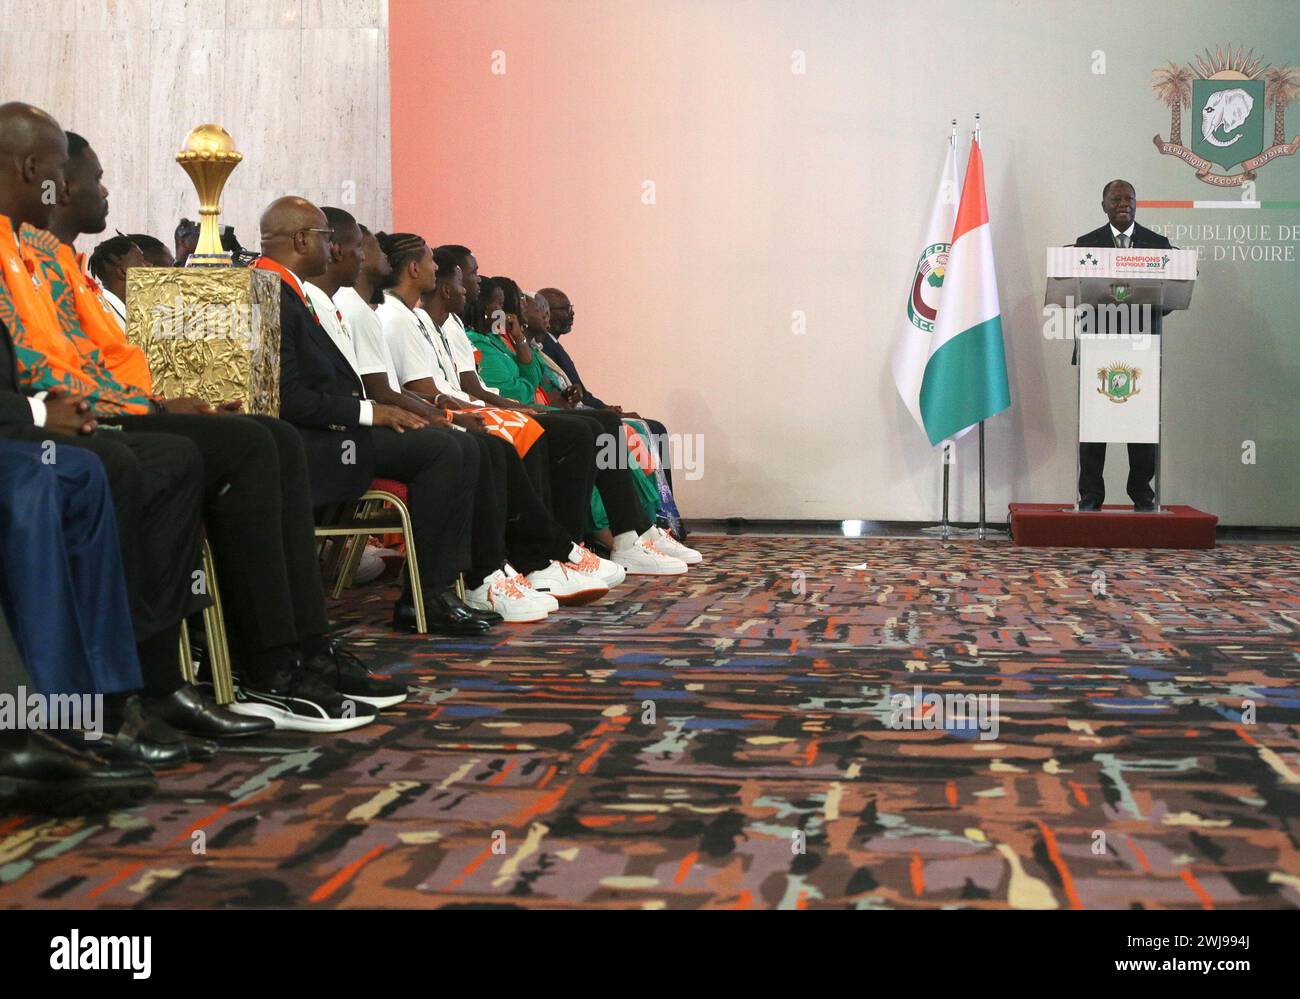 Abidjan, Cote d'Ivoire. 13th Feb, 2024. Cote d'Ivoire President Alassane Ouattara (1st R) speaks during a ceremony awarding the Cote d'Ivoire national football team at the Presidential Palace in Abidjan, Cote d'Ivoire, Feb. 13, 2024. Cote d'Ivoire won the 2023 Africa Cup of Nations (AFCON) on Sunday in Abidjan, beating Nigeria 2-1 in the final. Credit: Yvan Sonh/Xinhua/Alamy Live News Stock Photo